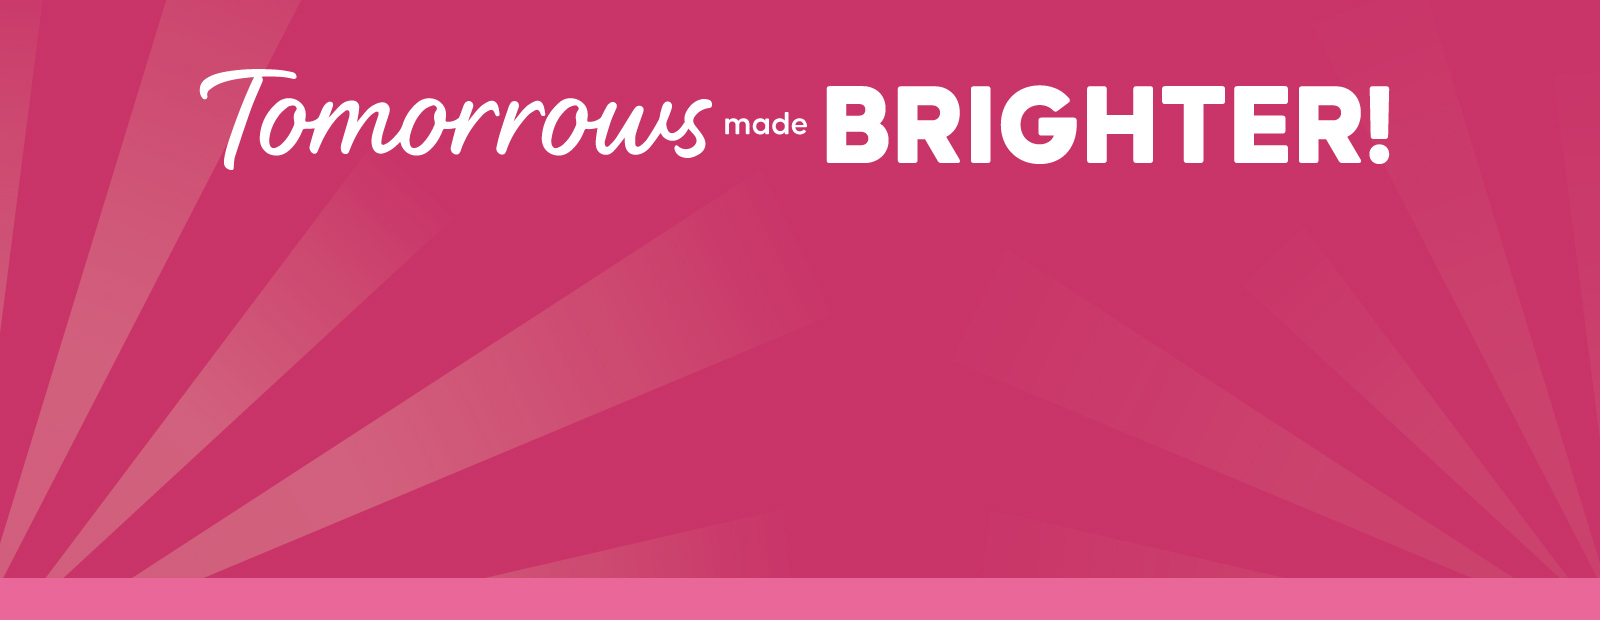 Tomorrows made brighter on pink background